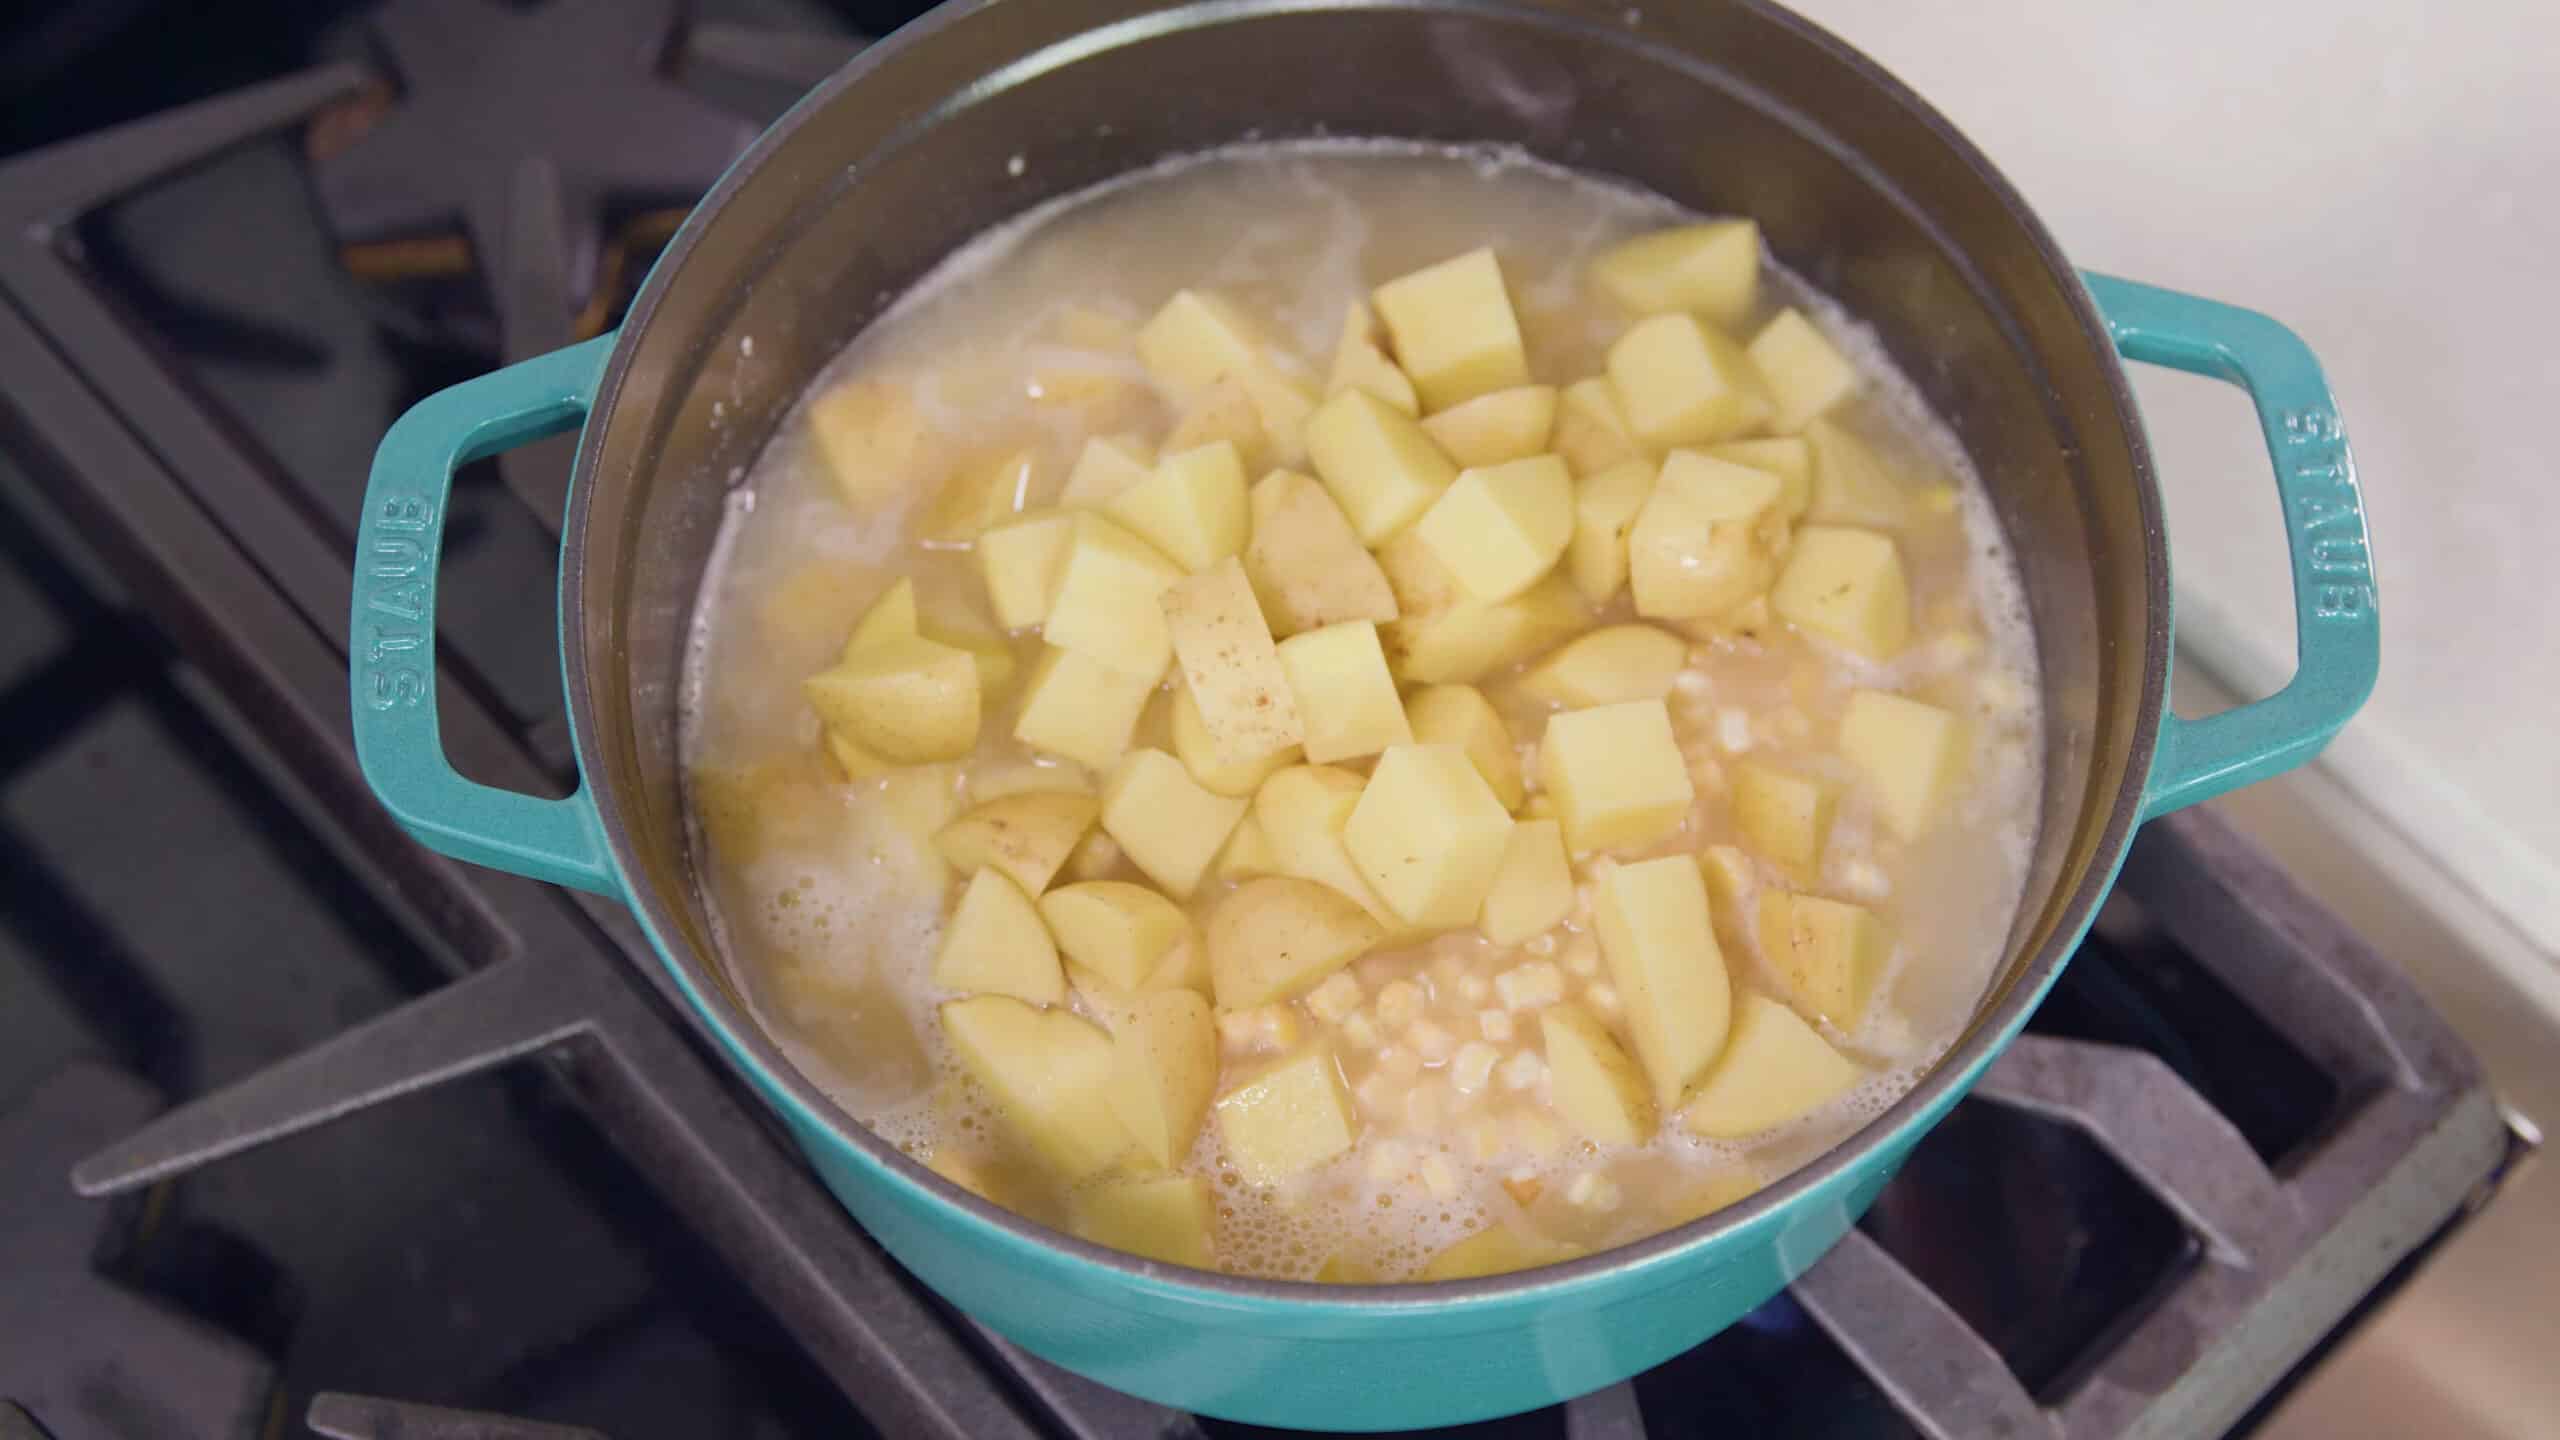 Overhead view of enamel coated cast iron pot filled with corn, onions, flour (for thickening), and Yukon gold potatoes, all on a stovetop burner.